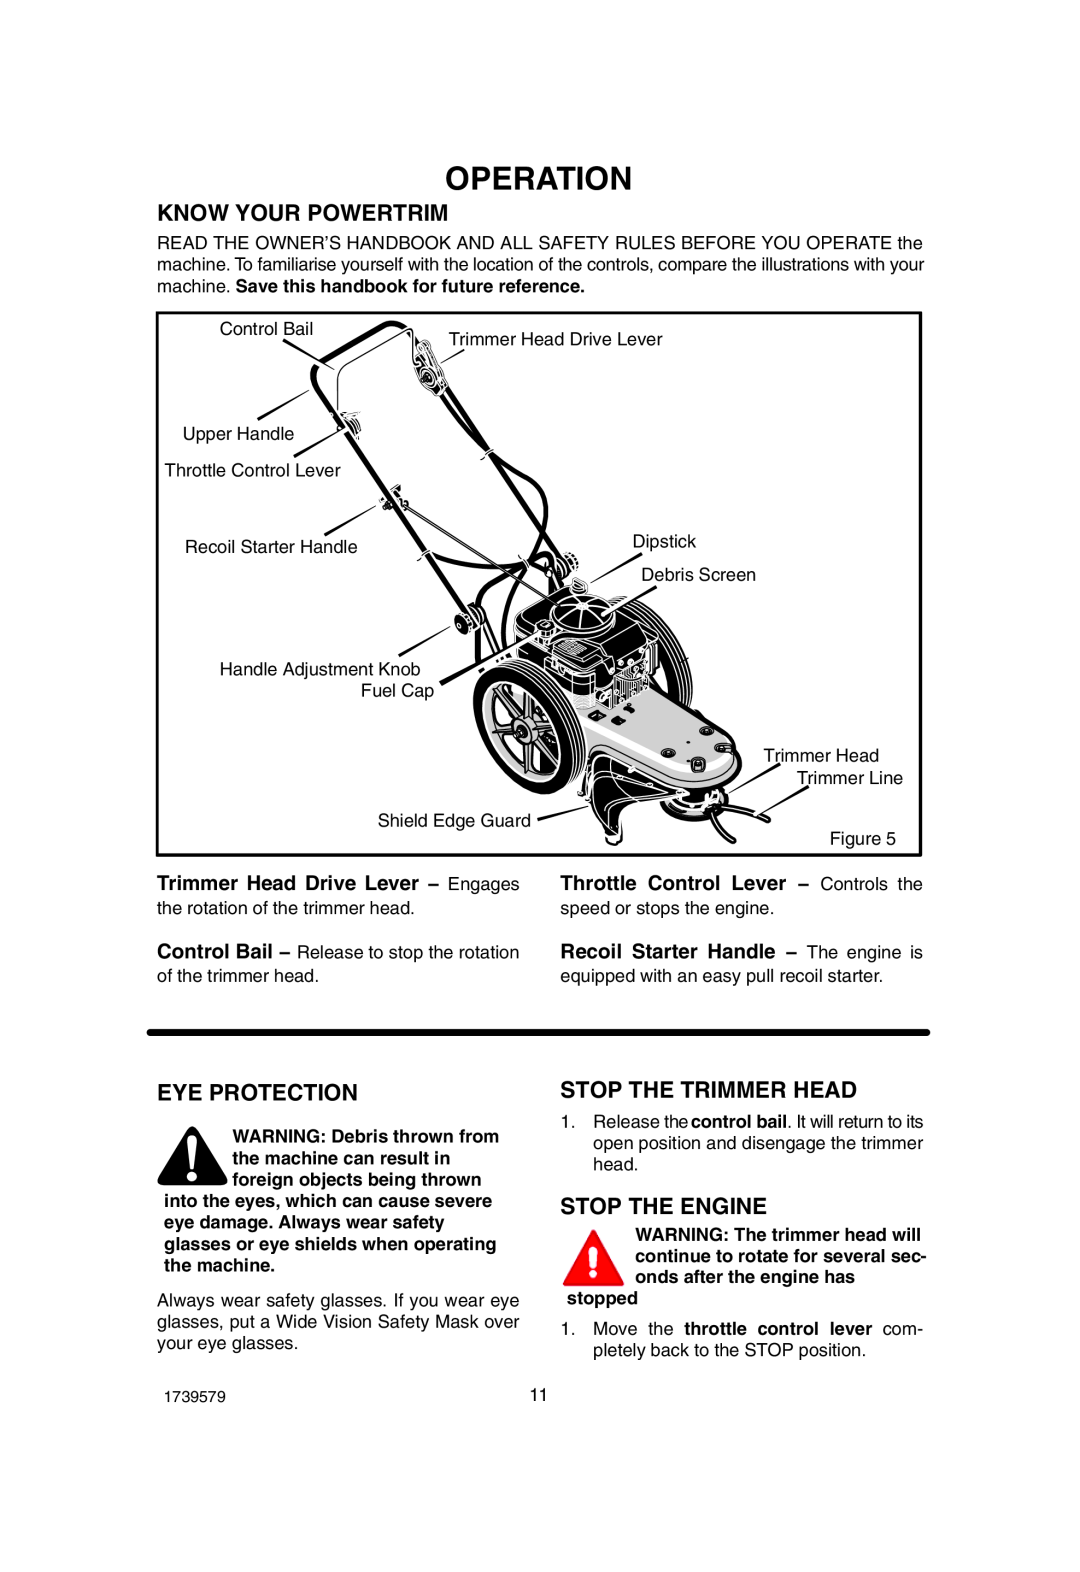 Hayter Mowers 407F manual Operation, Know Your Powertrim, Eye Protection, Stop The Trimmer Head, Stop The Engine 